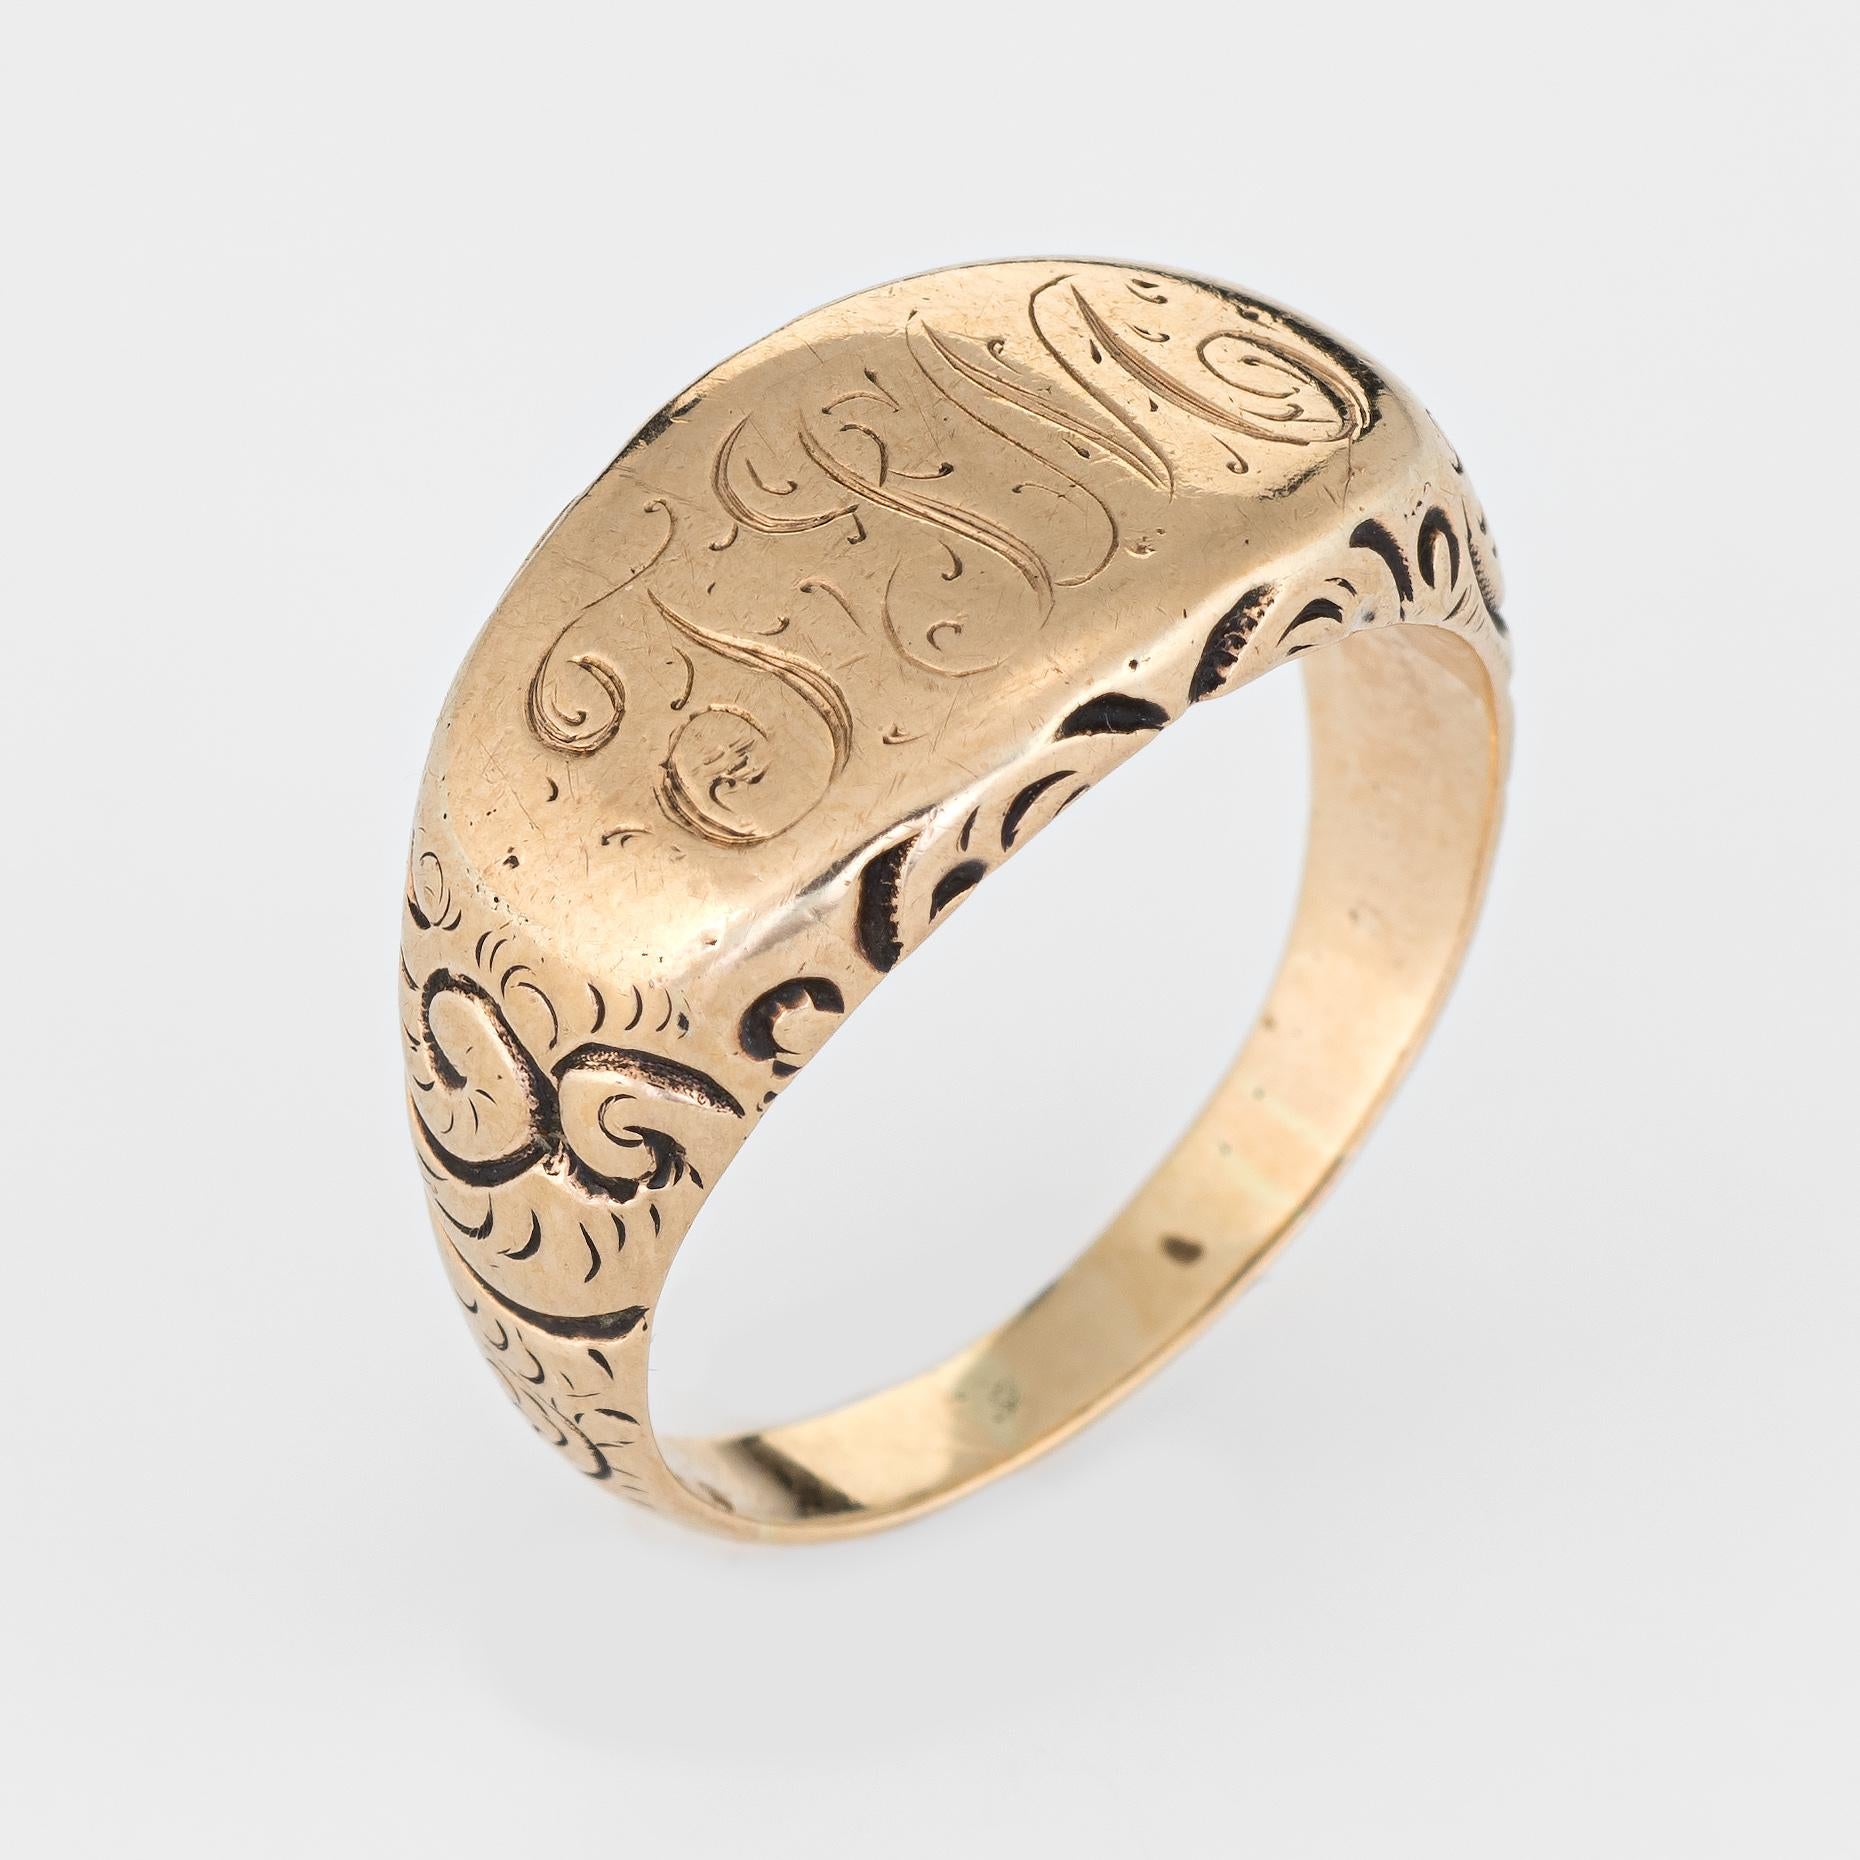 Lovely antique Victorian signet ring (circa 1880s to 1900s), crafted in 10 karat yellow gold. 

The center is inscribed with initials 